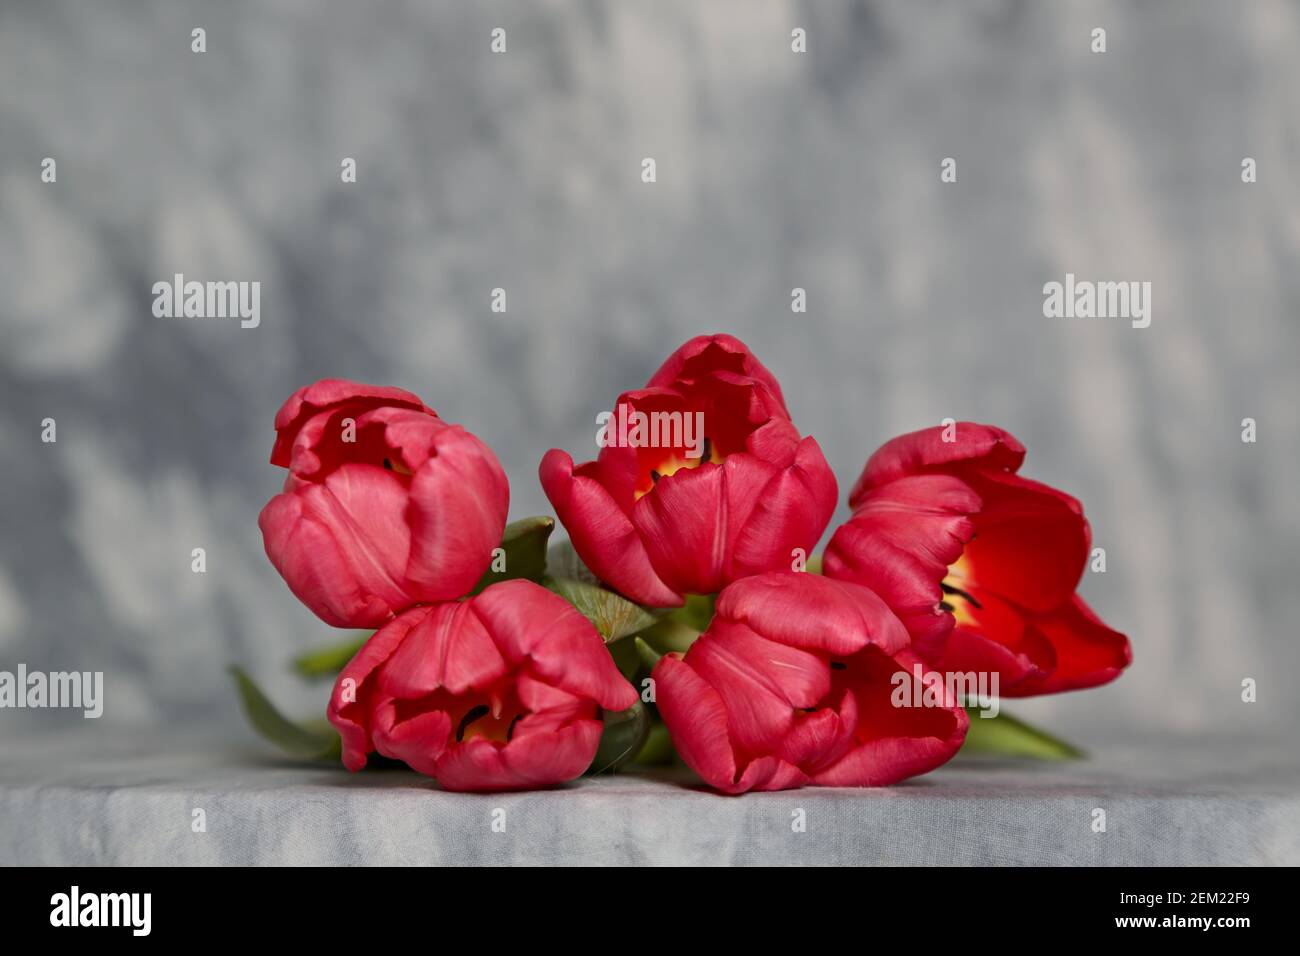 Five red tulips on a table Stock Photo